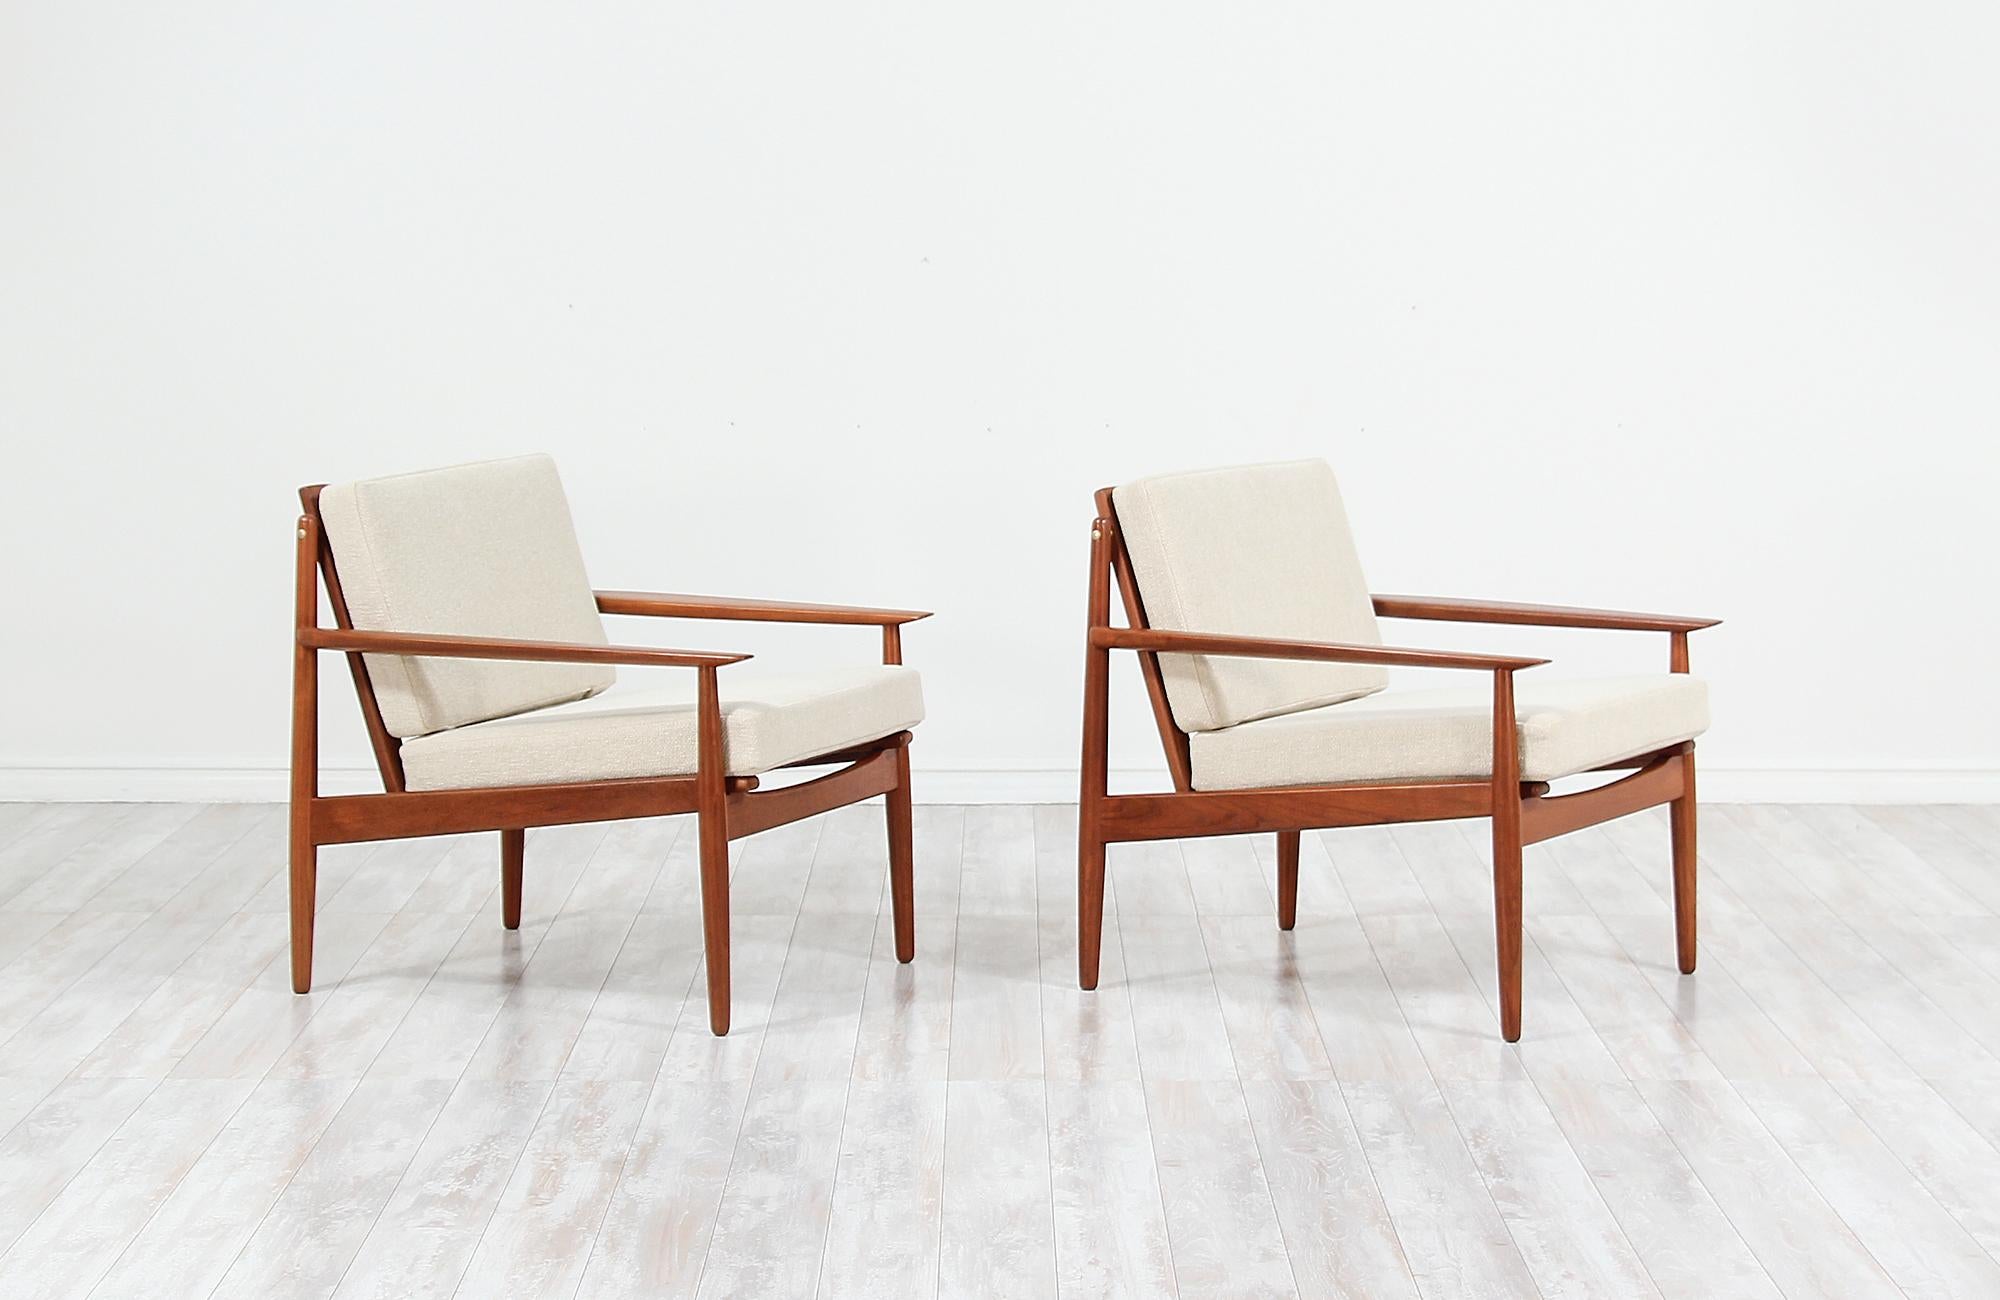 Pair of elegant modern lounge chairs designed by Svend Åge Eriksen and manufactured in Denmark by Glostrup Møbelfabrik, circa 1960s. This beautiful pair of lounge chairs feature a solid teak wood frame and sculpted armrests with organic shapes